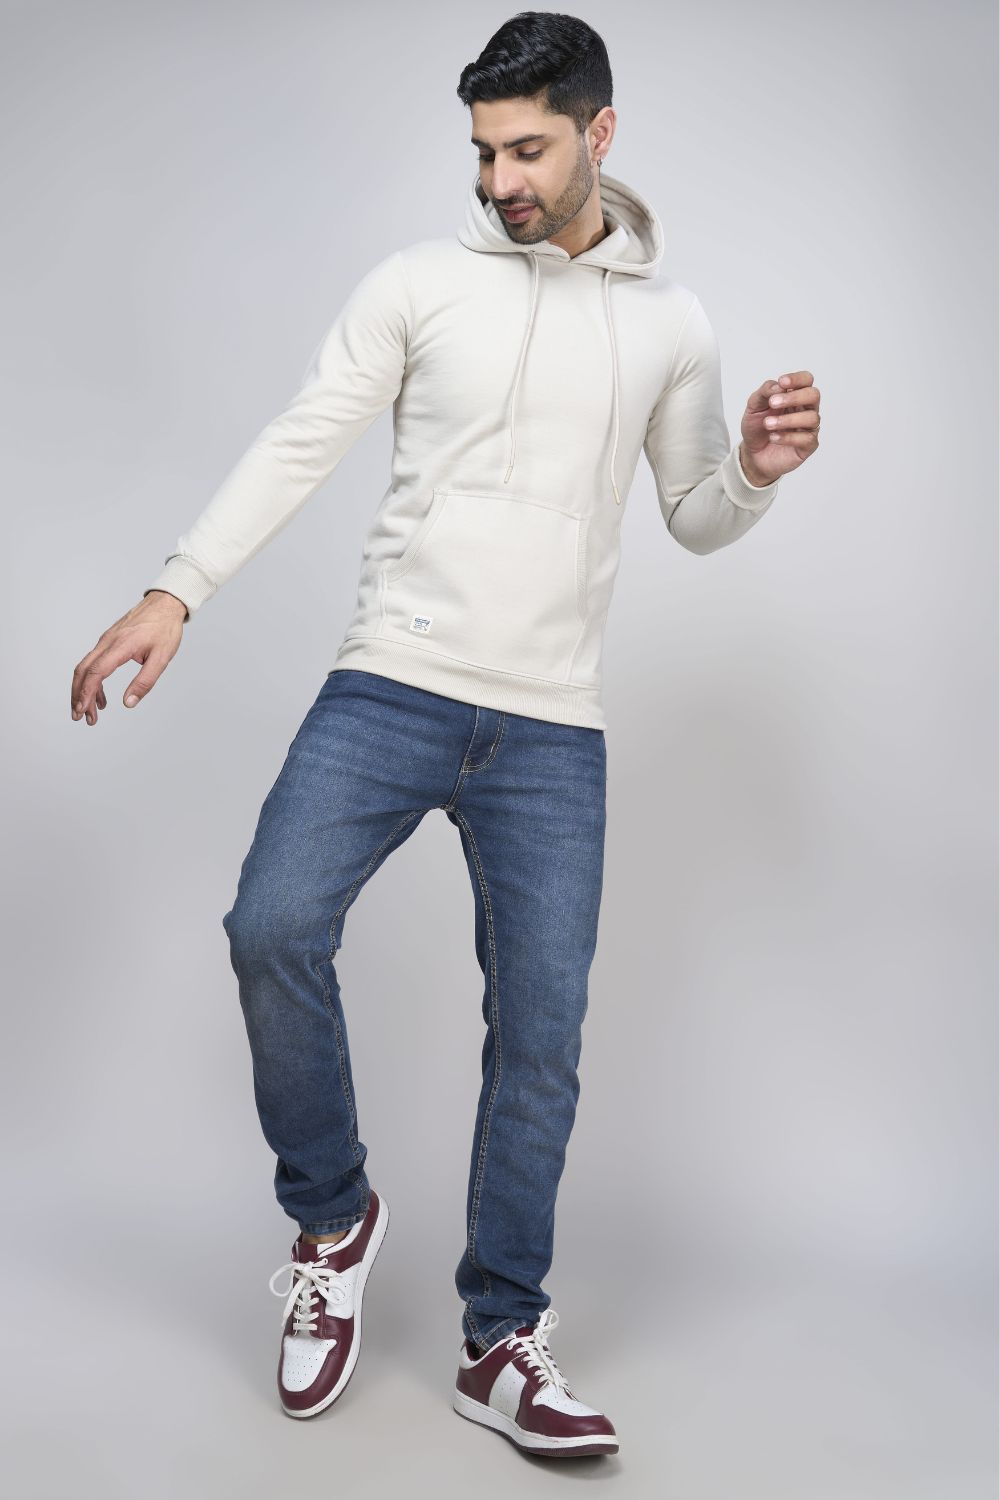 Silver Grey colored, hoodie for men with full sleeves and relaxed fit, front view.